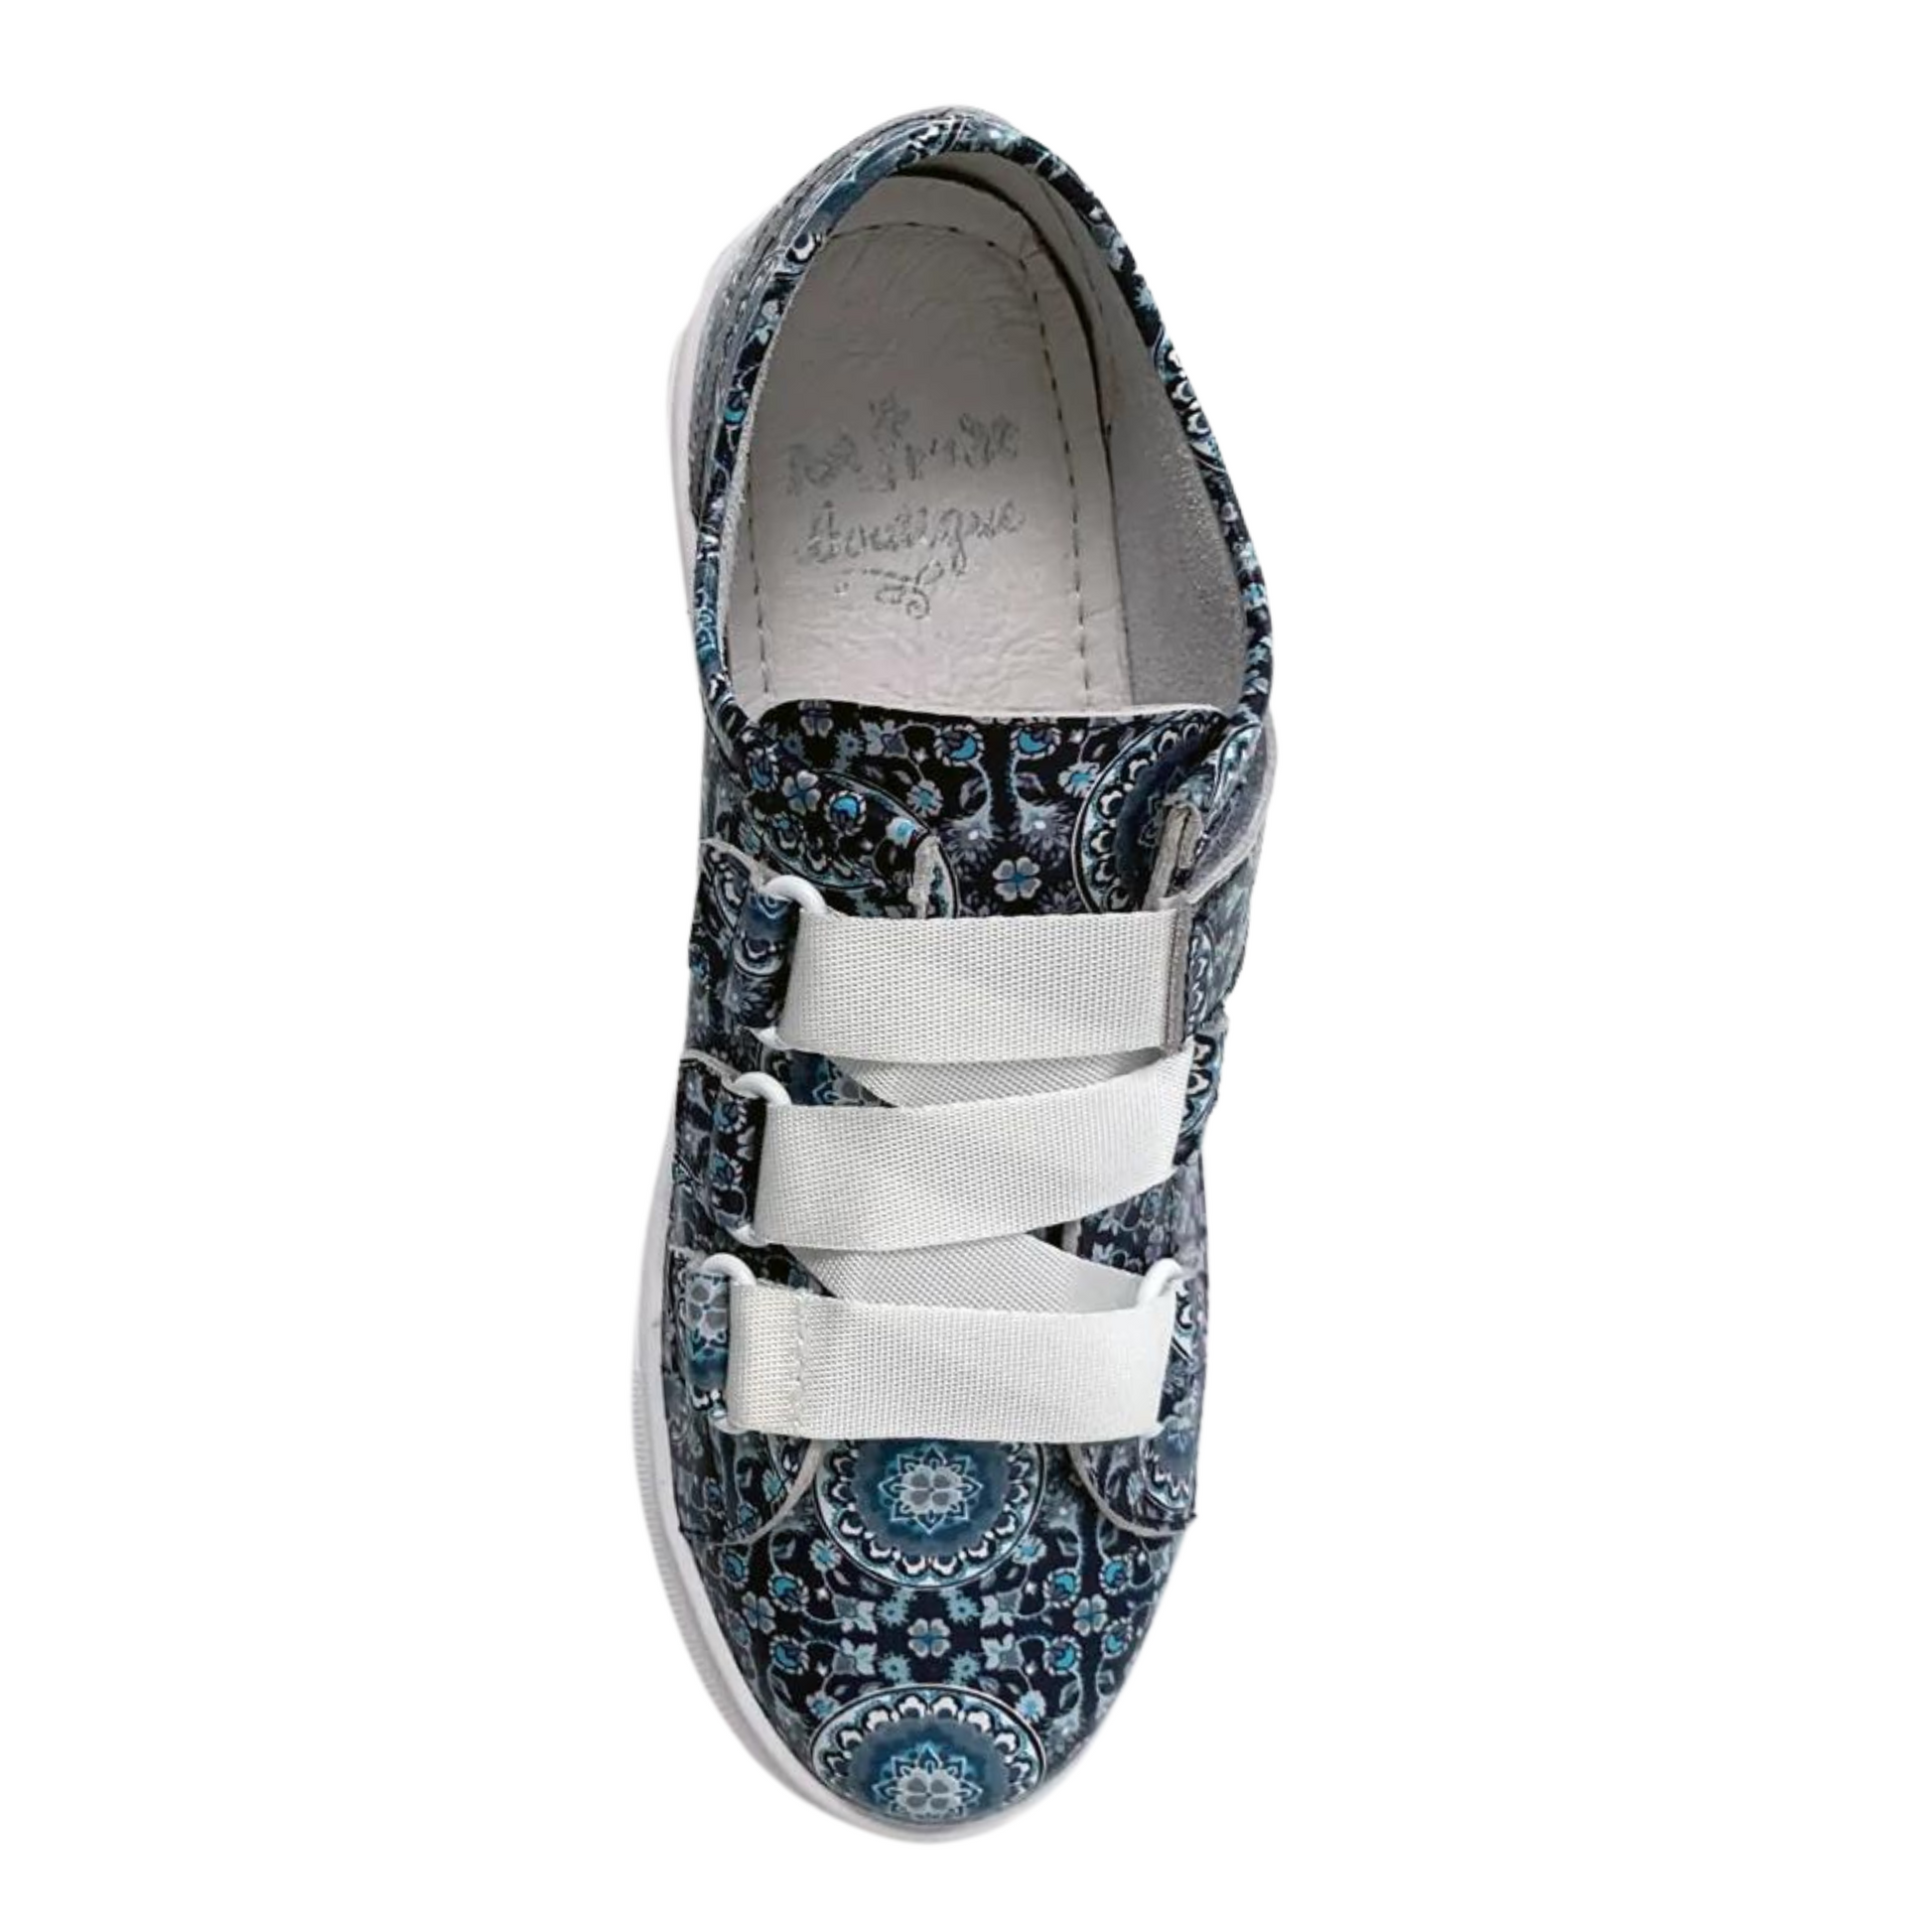 A top view of a blue patterned sneaker.